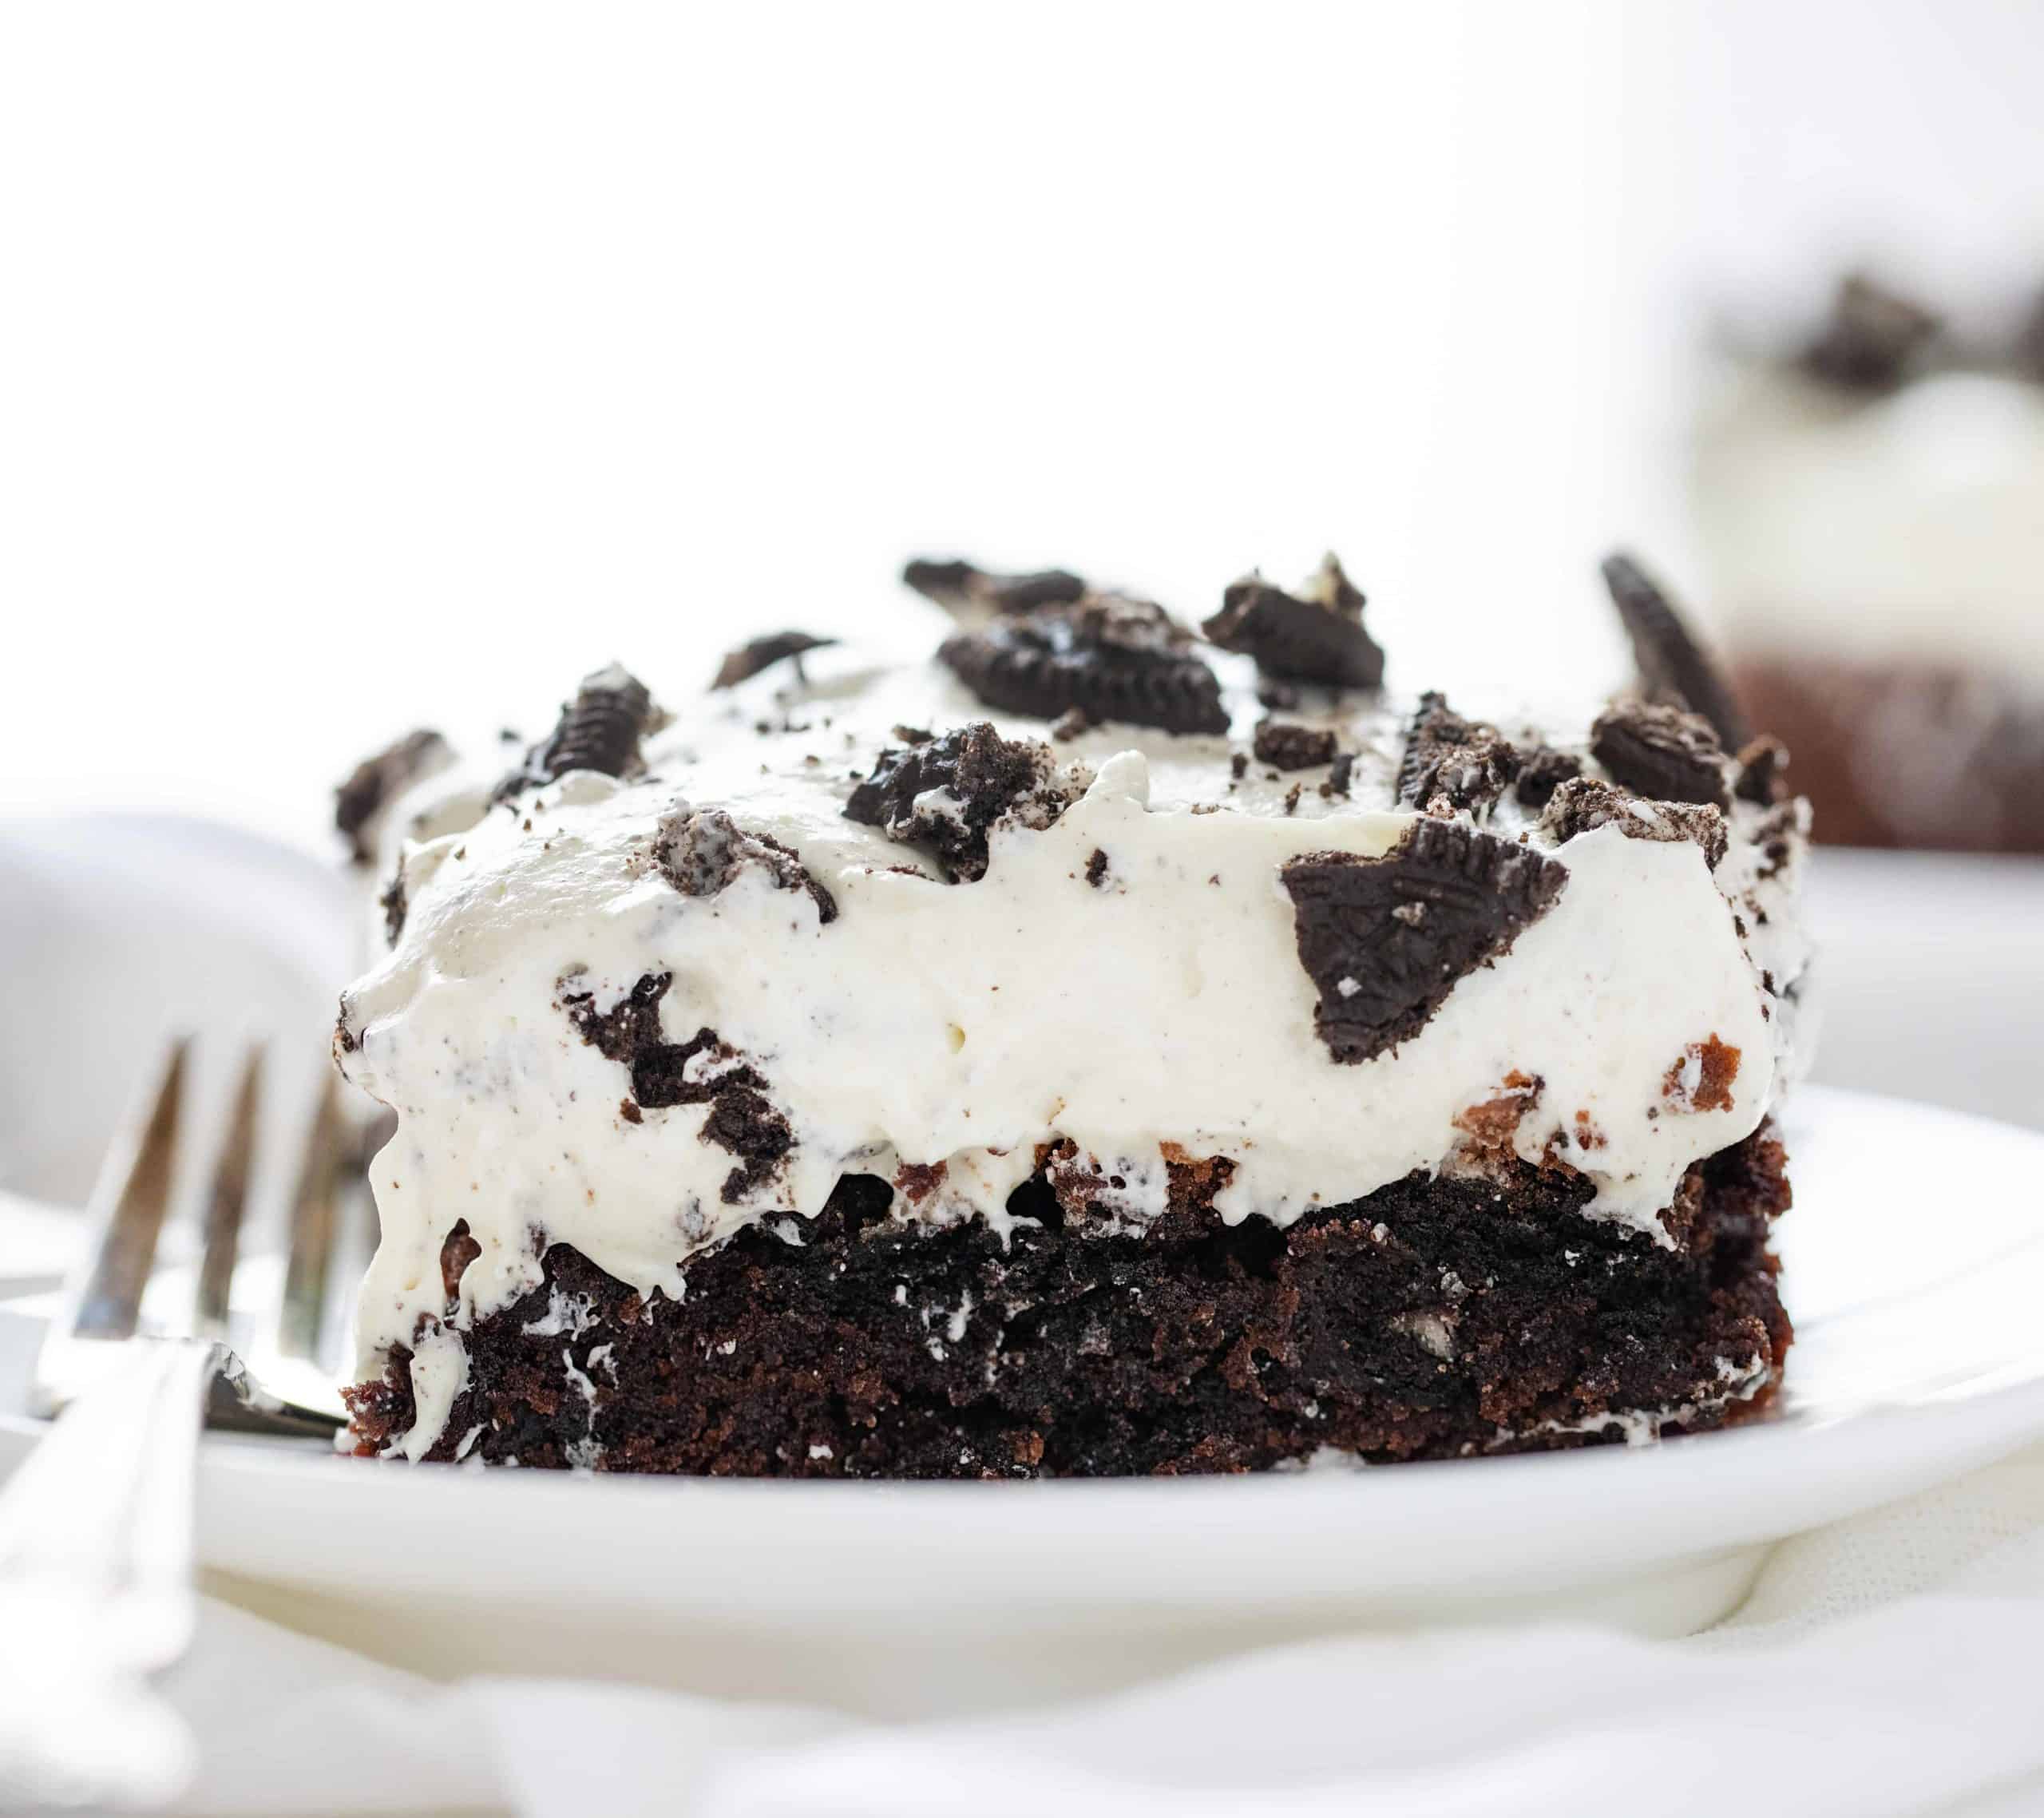 Okay folks, I saved the best for last! This Oreo Brownie Dessert is ...